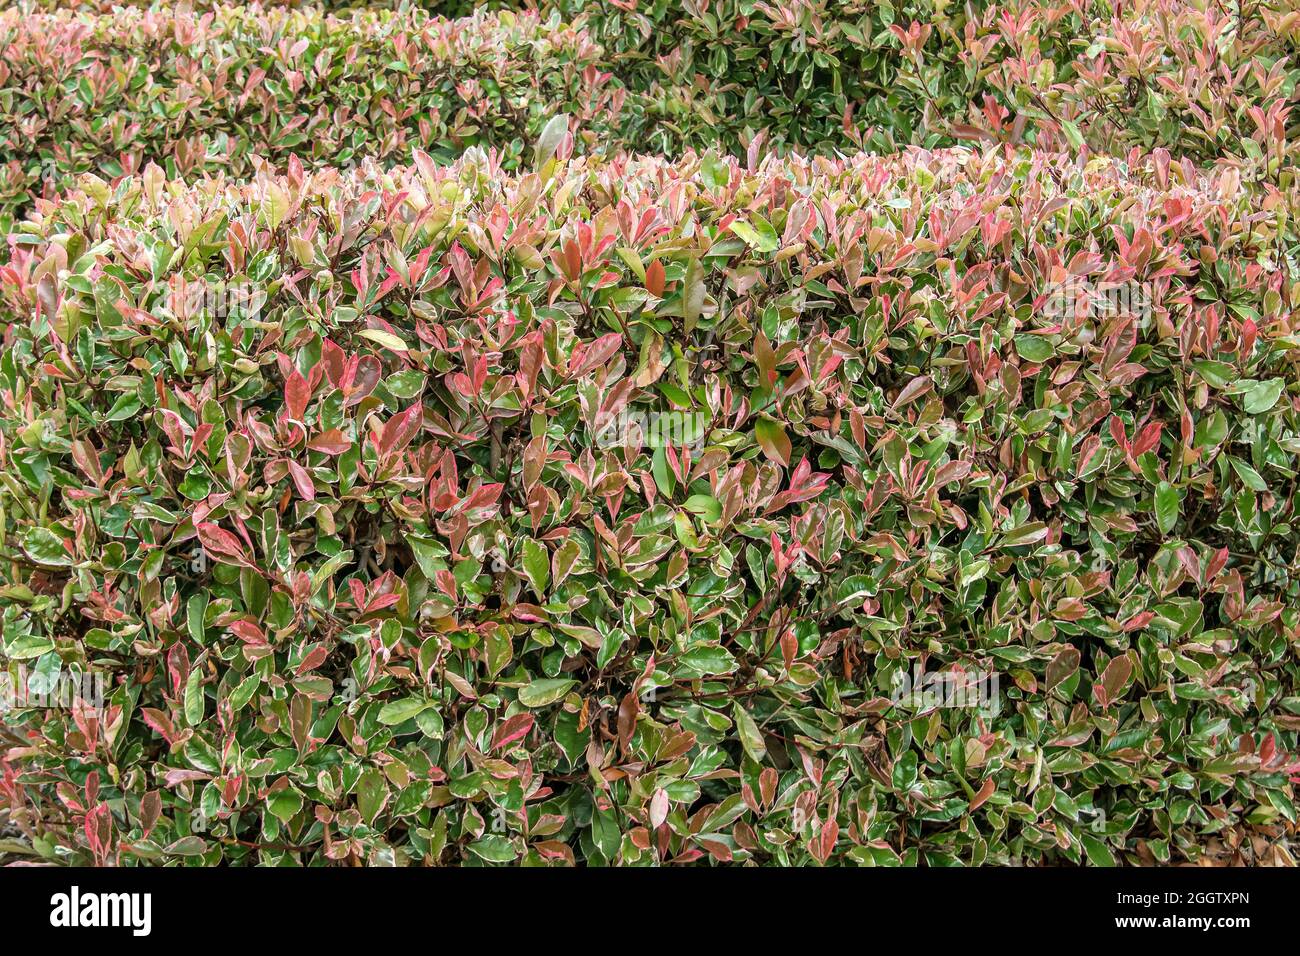 Fraser photinia (Photinia x fraseri 'Pink Marble', Photinia x fraseri Pink Marble, Photinia fraseri), leaves of cultivar Pink Marble, Germany Stock Photo